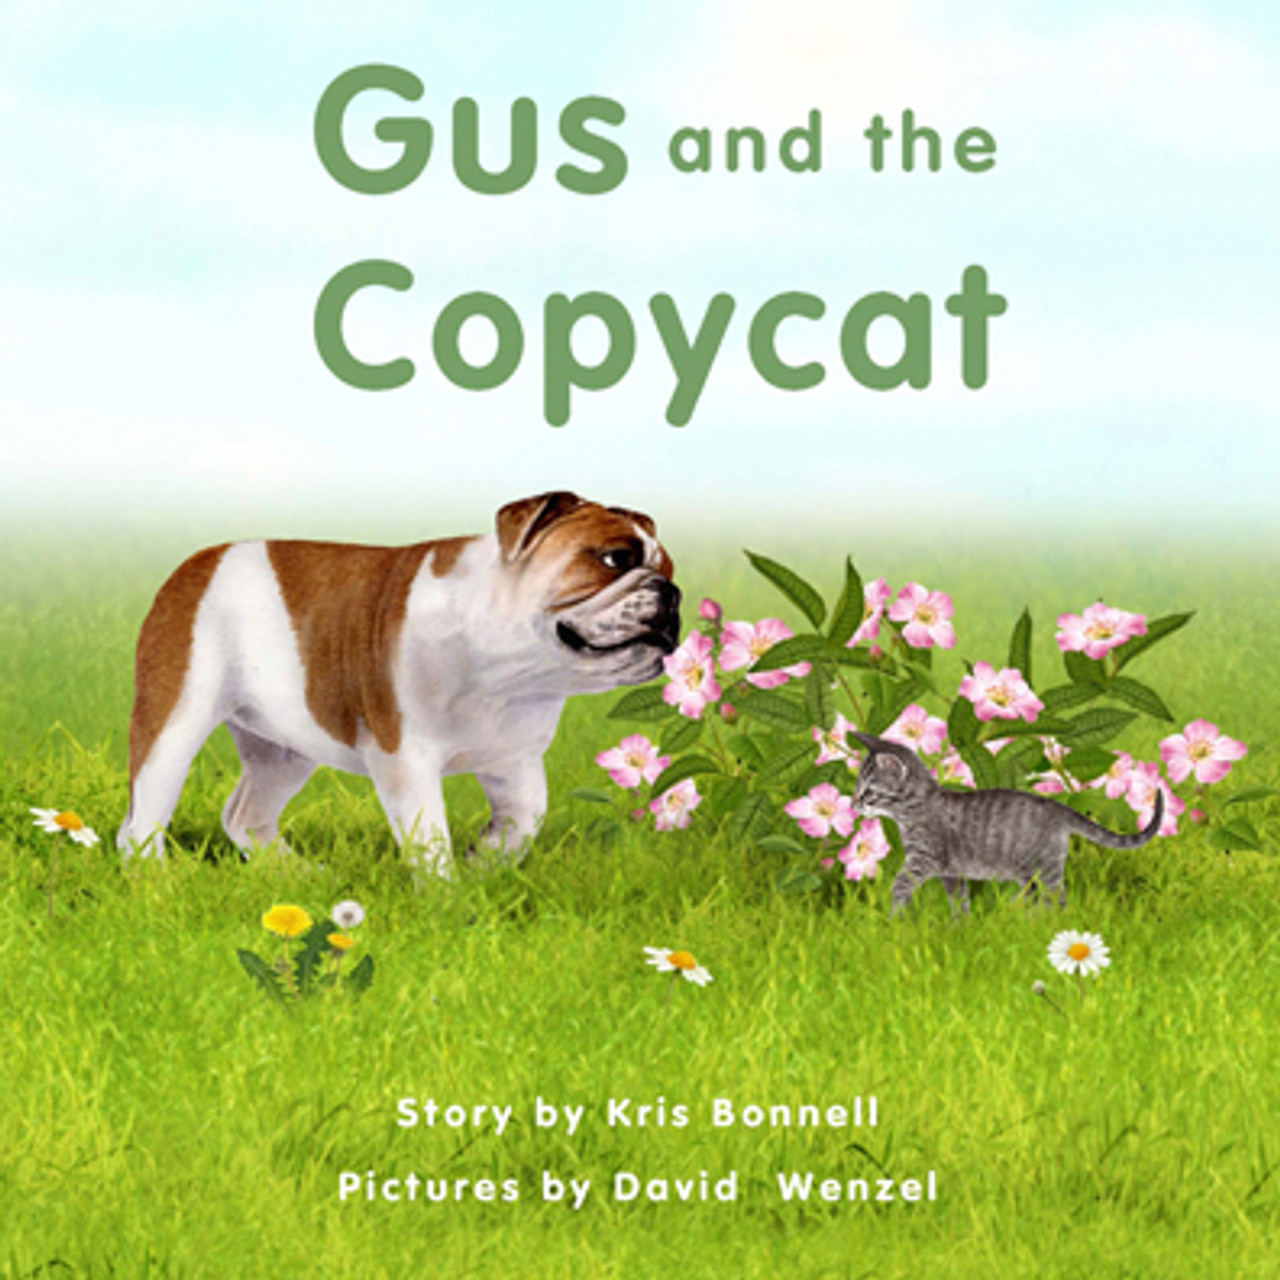 Rise of the copycat book cover, Books